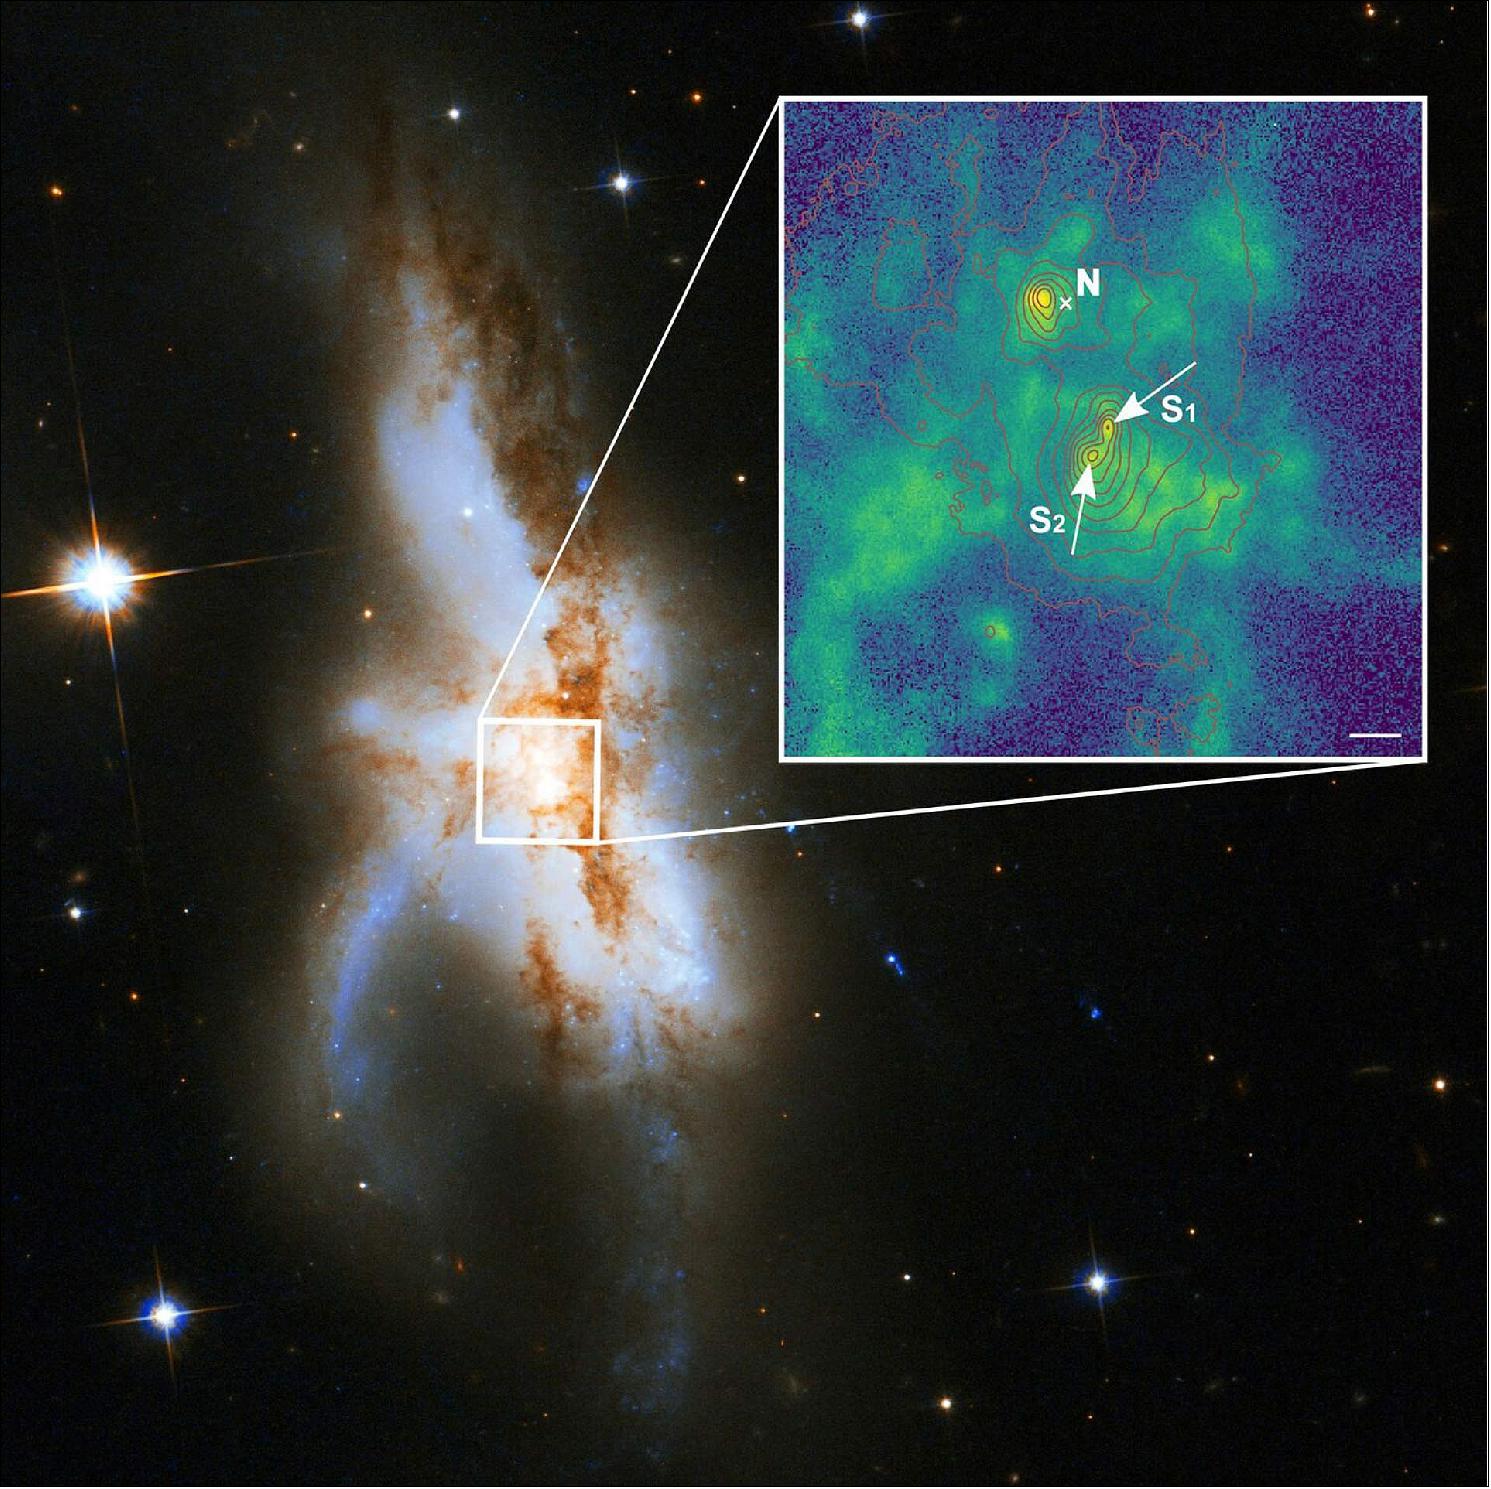 Figure 45: The irregular galaxy NGC 6240. New observations show that it harbors not two but three supermassive black holes at its core. The northern black hole (N) is active and was known before. The zoomed-in new high-spatial resolution image shows that the southern component consists of two supermassive black holes (S1 and S2). The green color indicates the distribution of gas ionized by radiation surrounding the black holes. The red lines show the contours of the starlight from the galaxy and the length of the white bar corresponds to 1000 light years [image credit: P Weilbacher (AIP), NASA, ESA, the Hubble Heritage (STScI/AURA)-ESA/Hubble Collaboration, and A Evans (University of Virginia, Charlottesville/NRAO/Stony Brook University)]